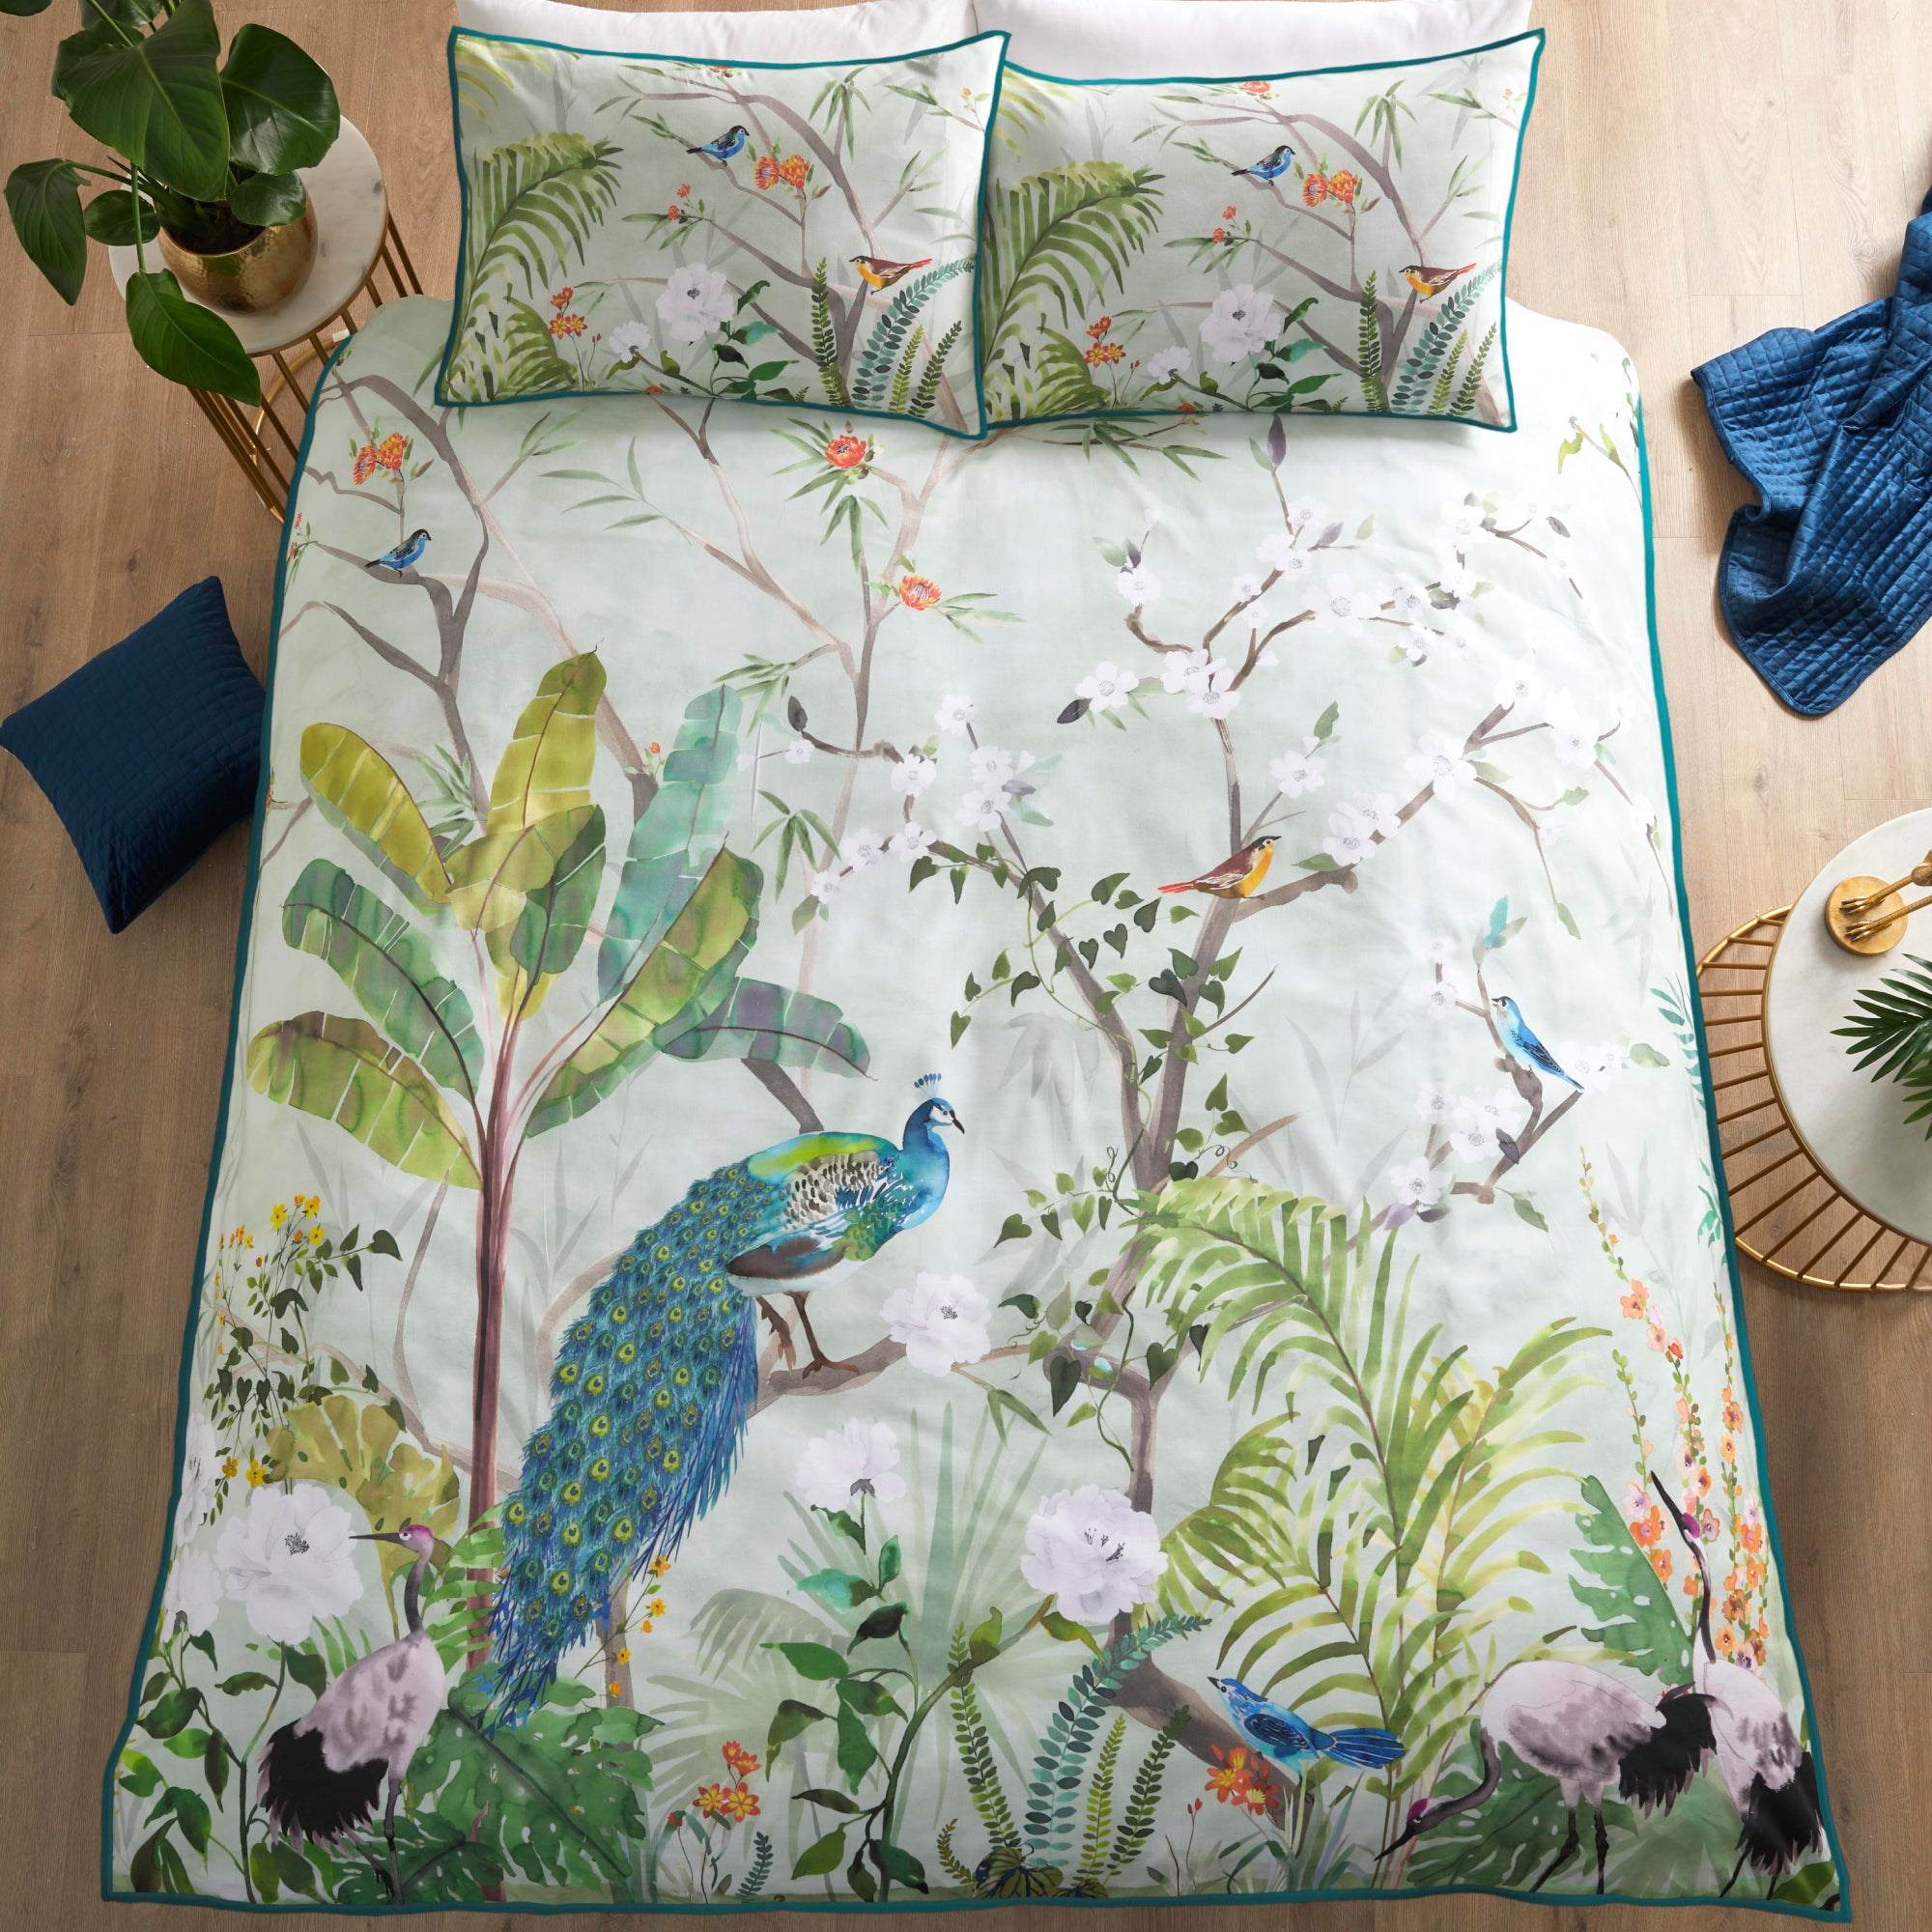 Duvet Cover Set Peacock Jungle by Soiree in Green